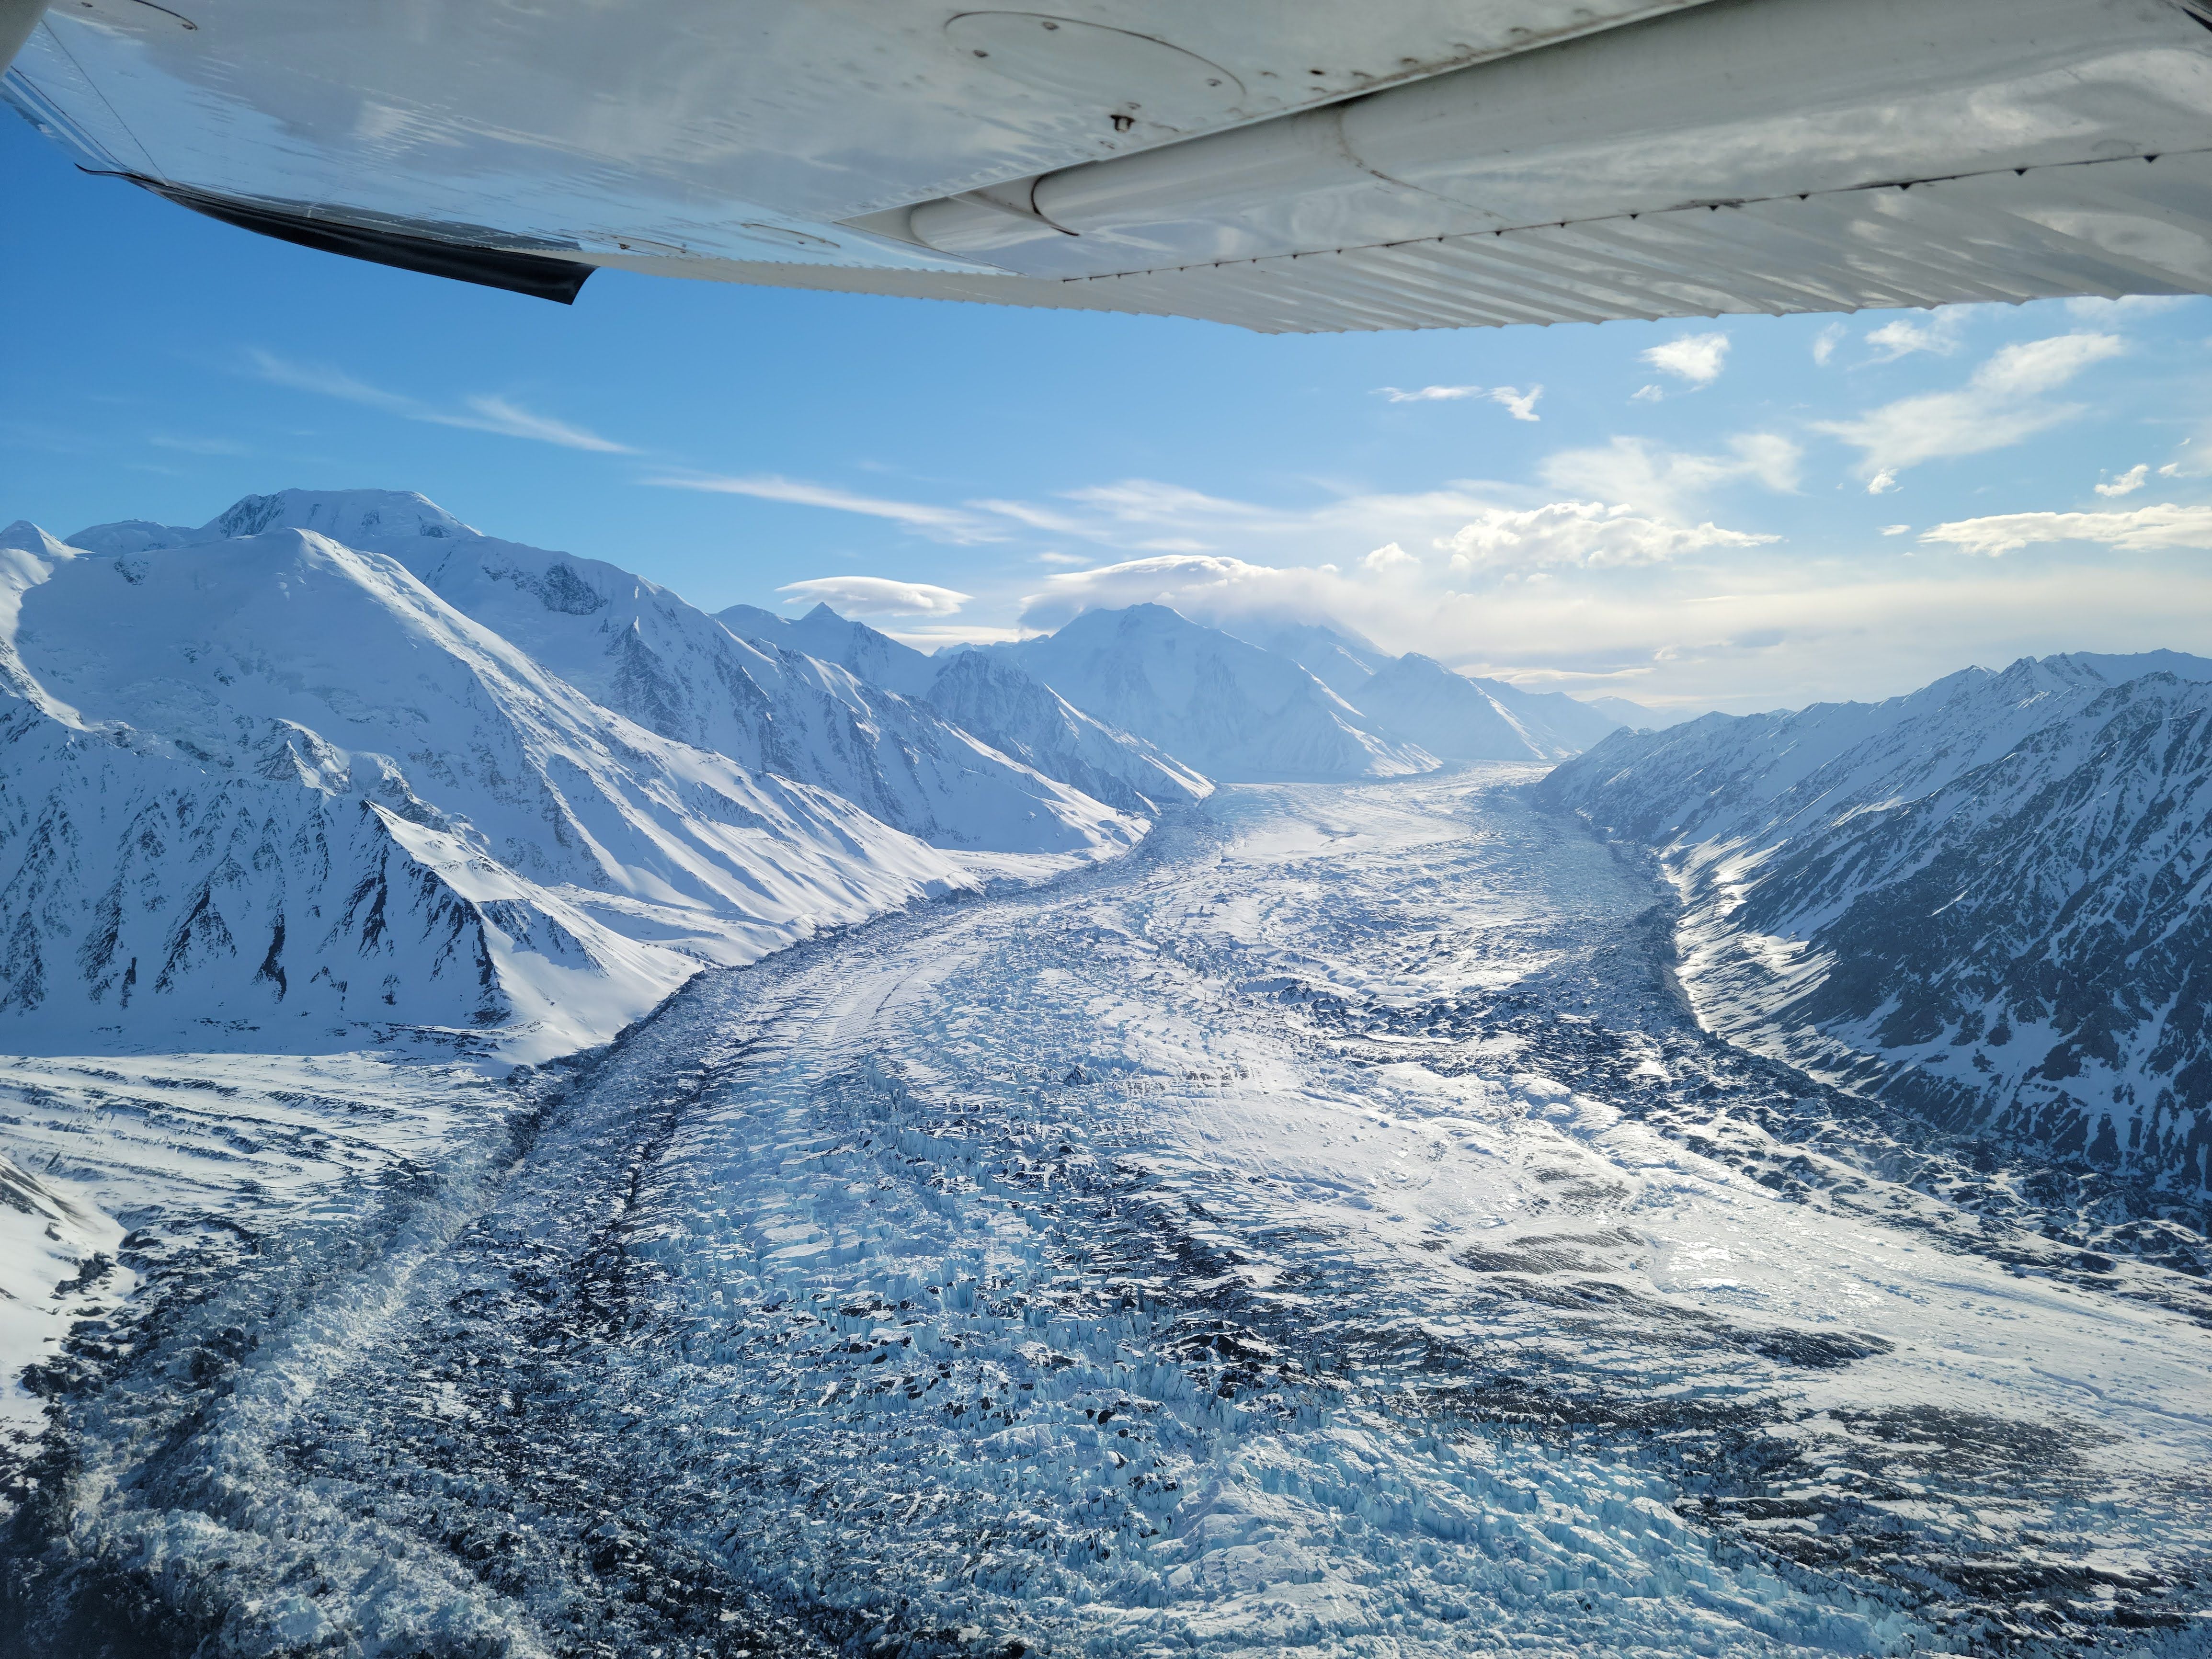 Scientists are analyzing data from Denali's Muldrow Glacier surge, which  might unravel answers about the world's glaciers - Anchorage Daily News